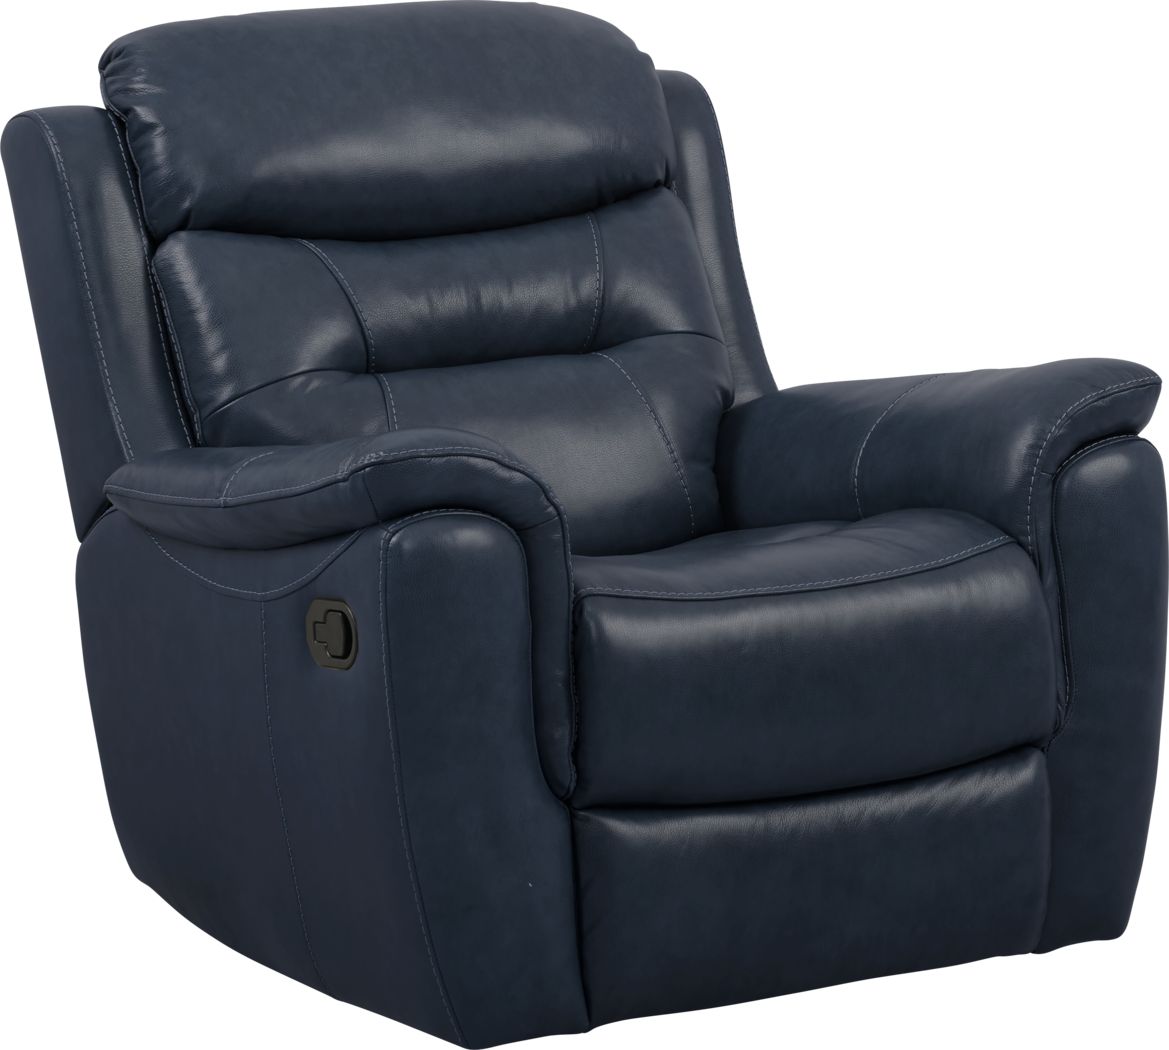 Sabella Navy Leather Glider Recliner - Rooms To Go